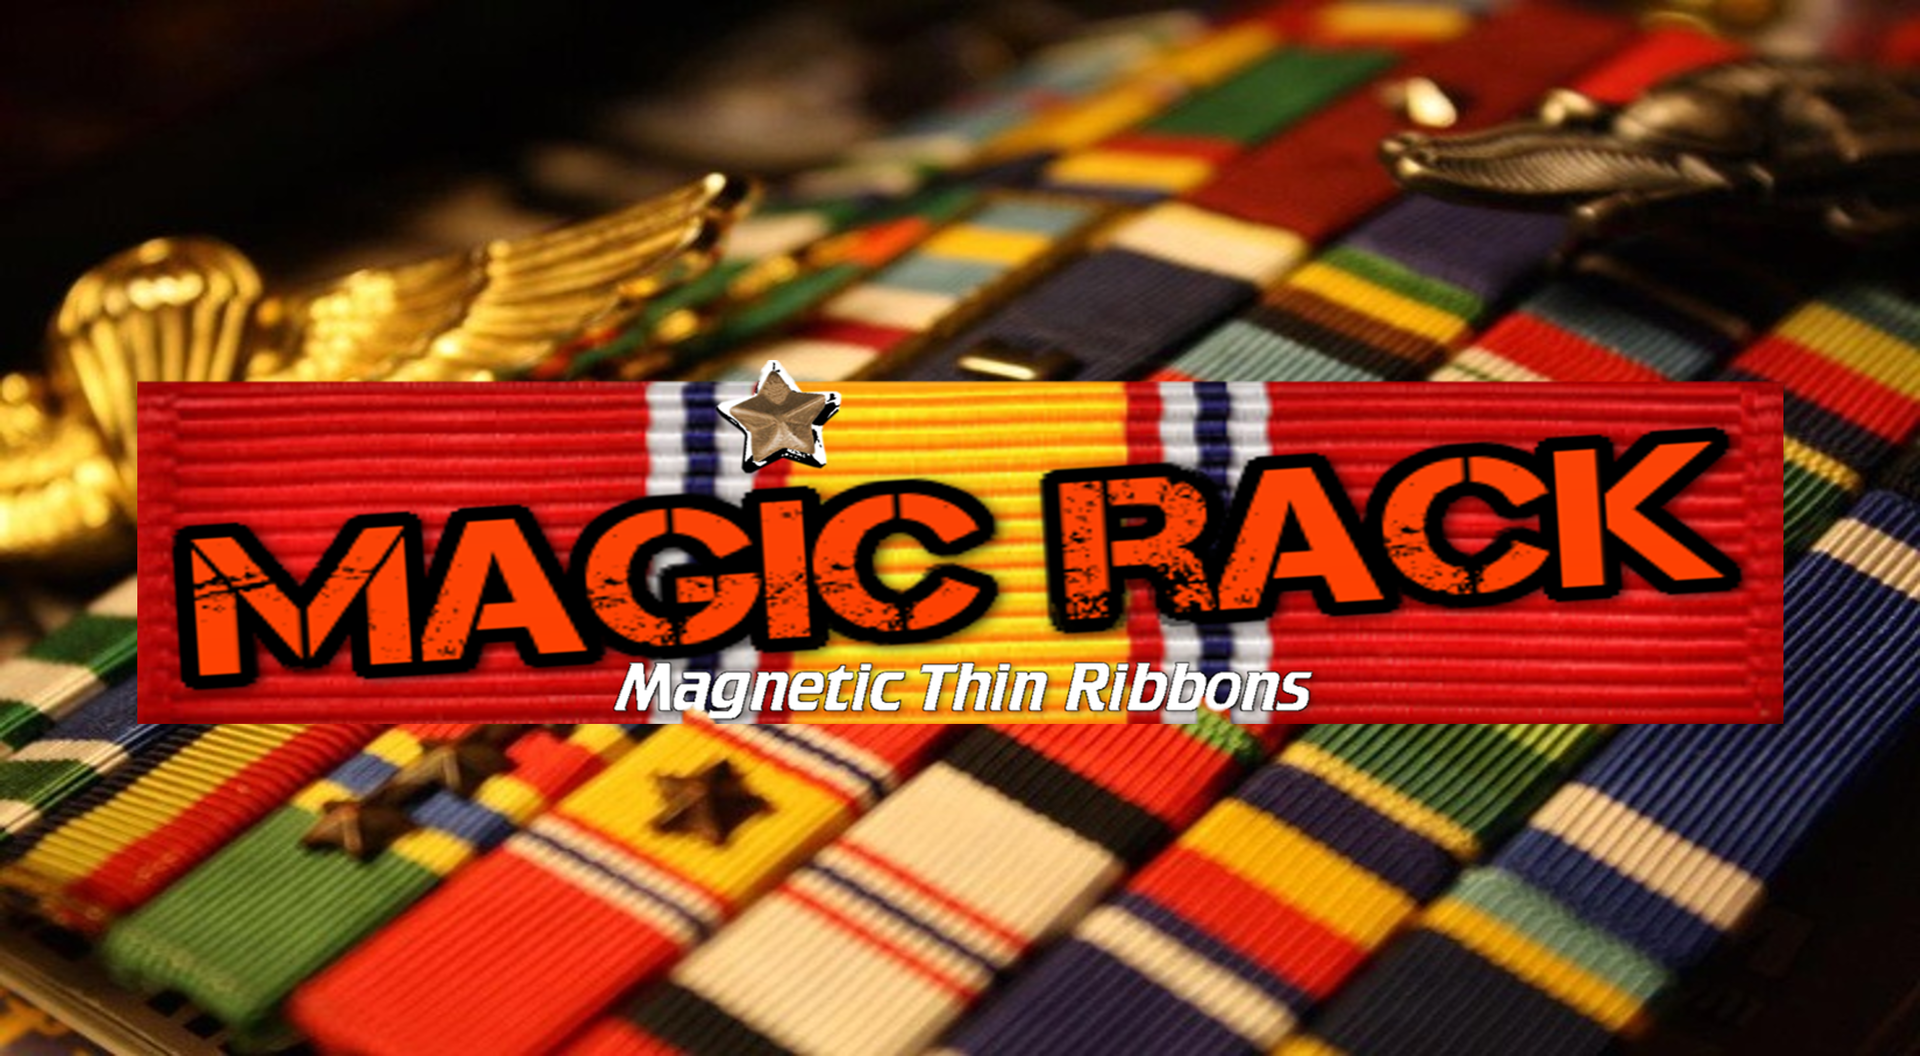 pinit Magnetic Thin Ribbons for Military Service Members